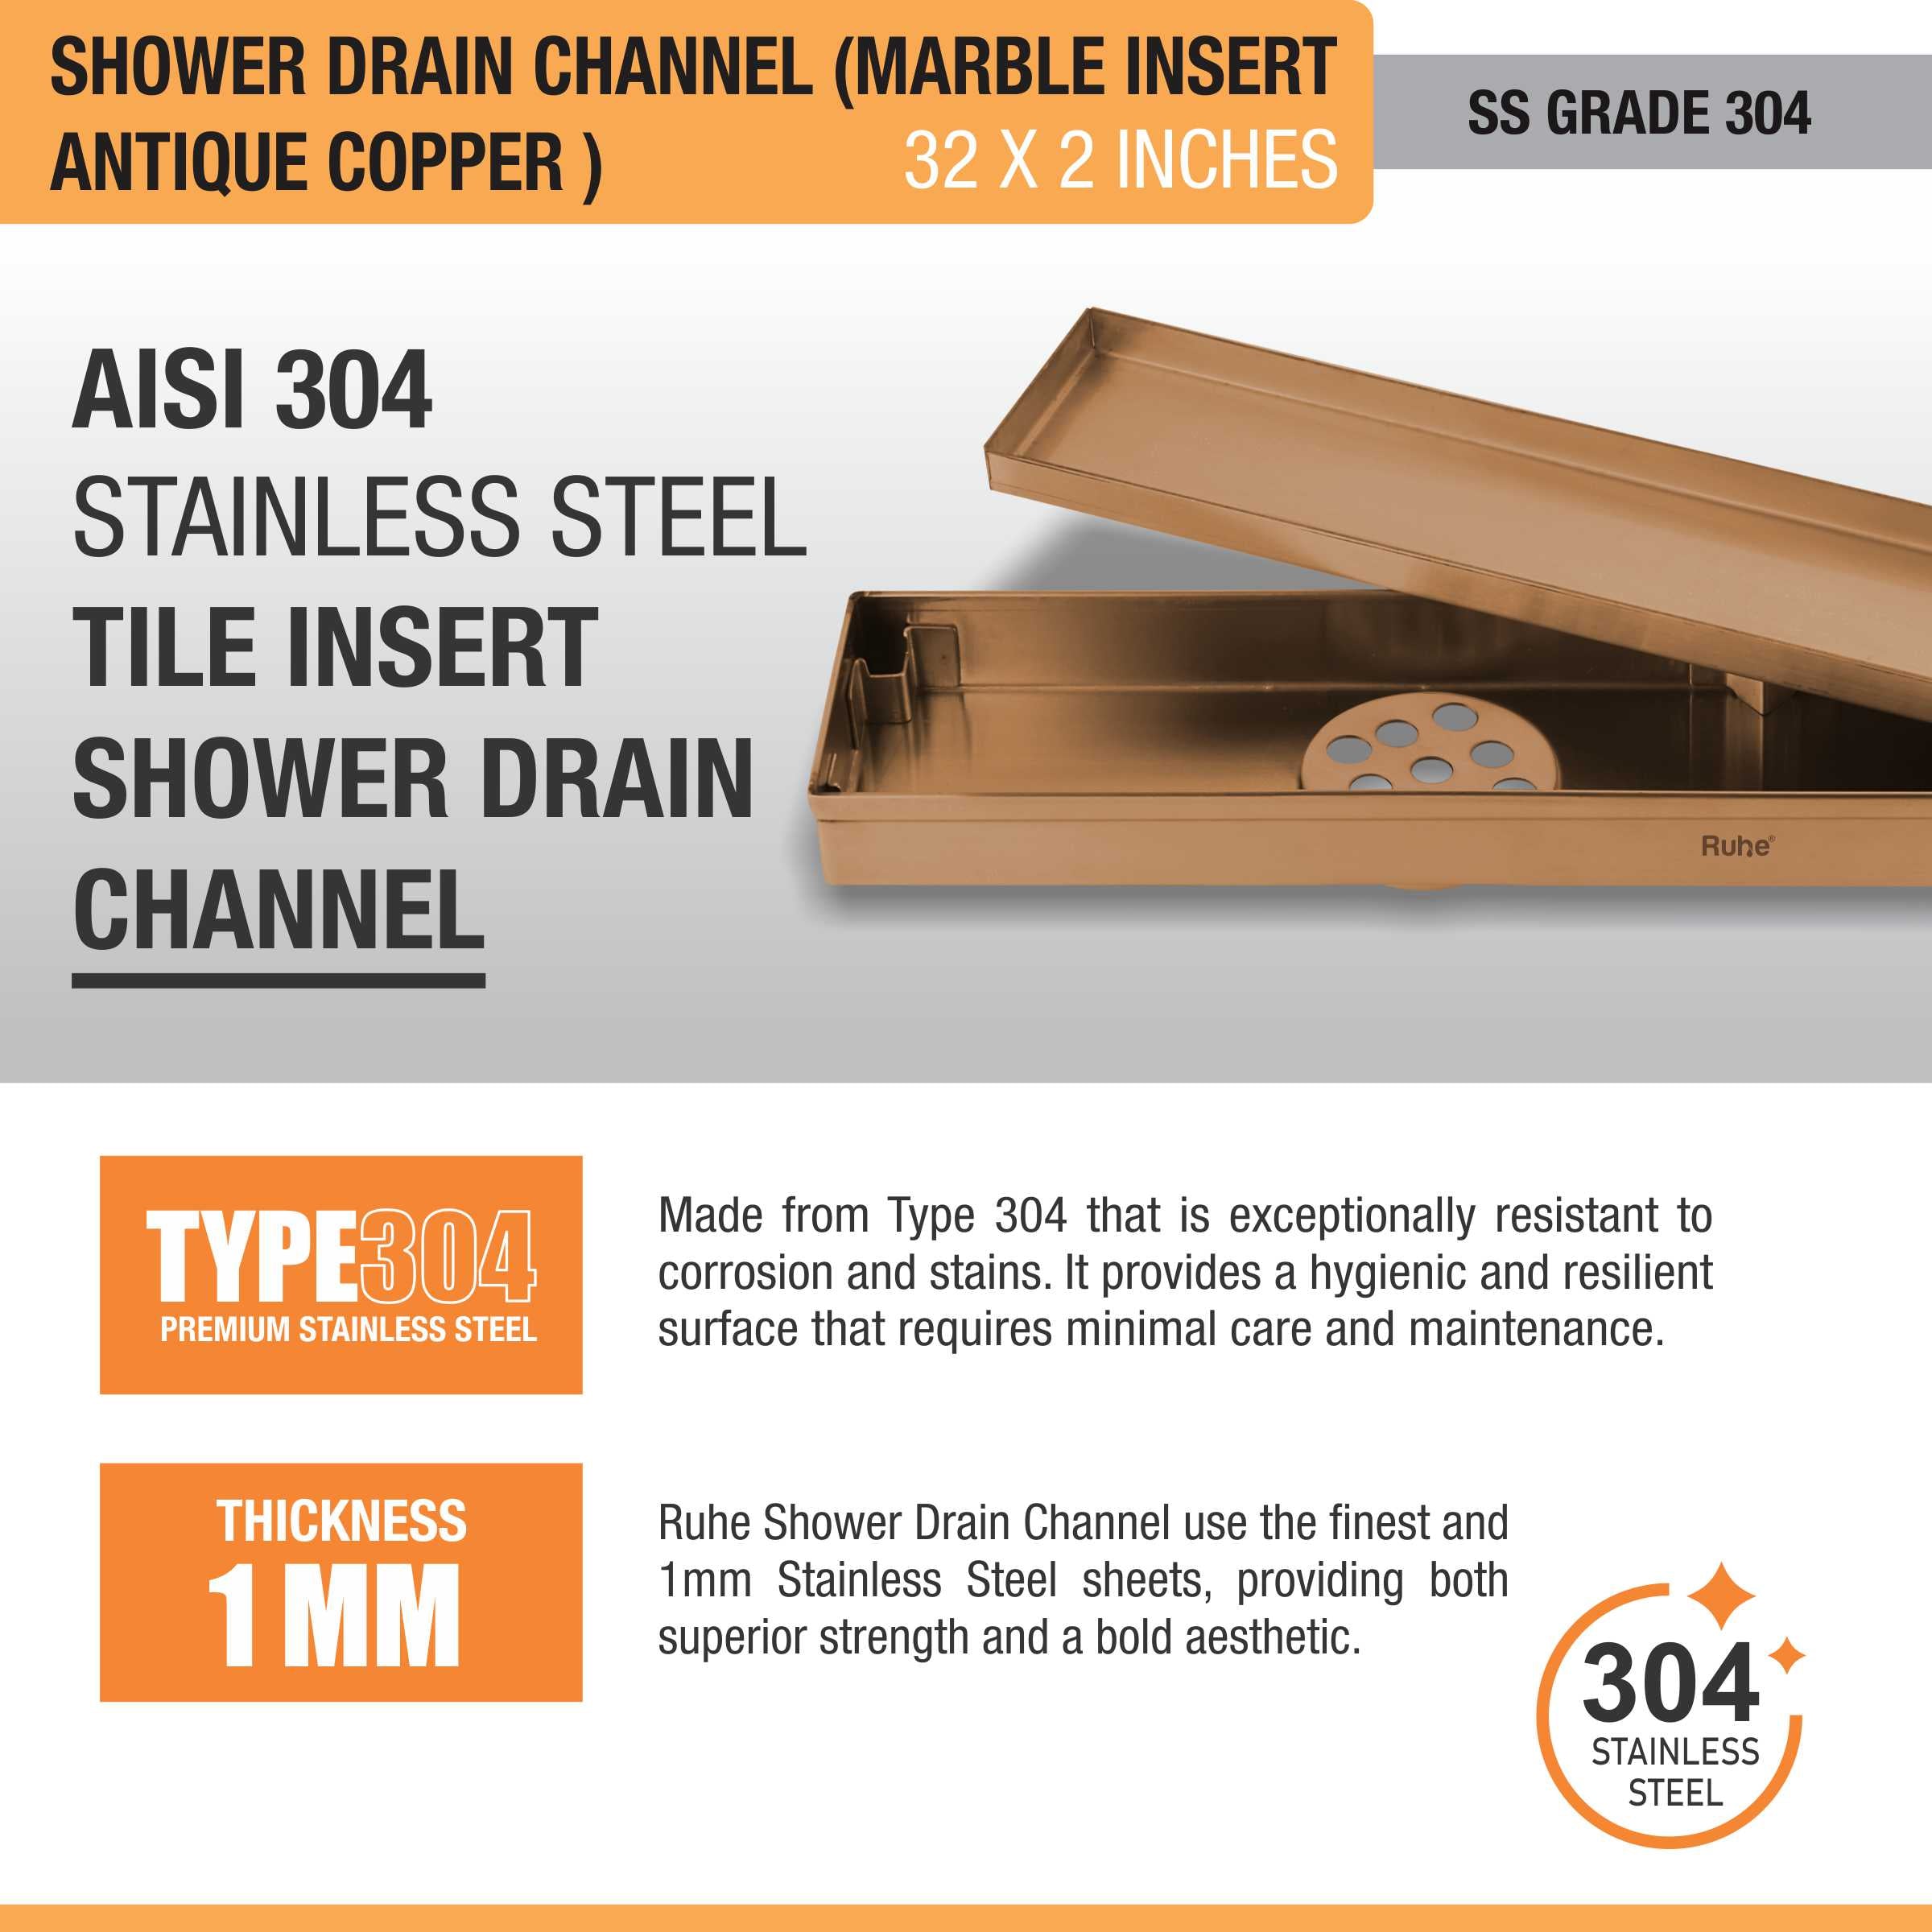 Marble Insert Shower Drain Channel (32 x 2 Inches) ANTIQUE COPPER stainless steel